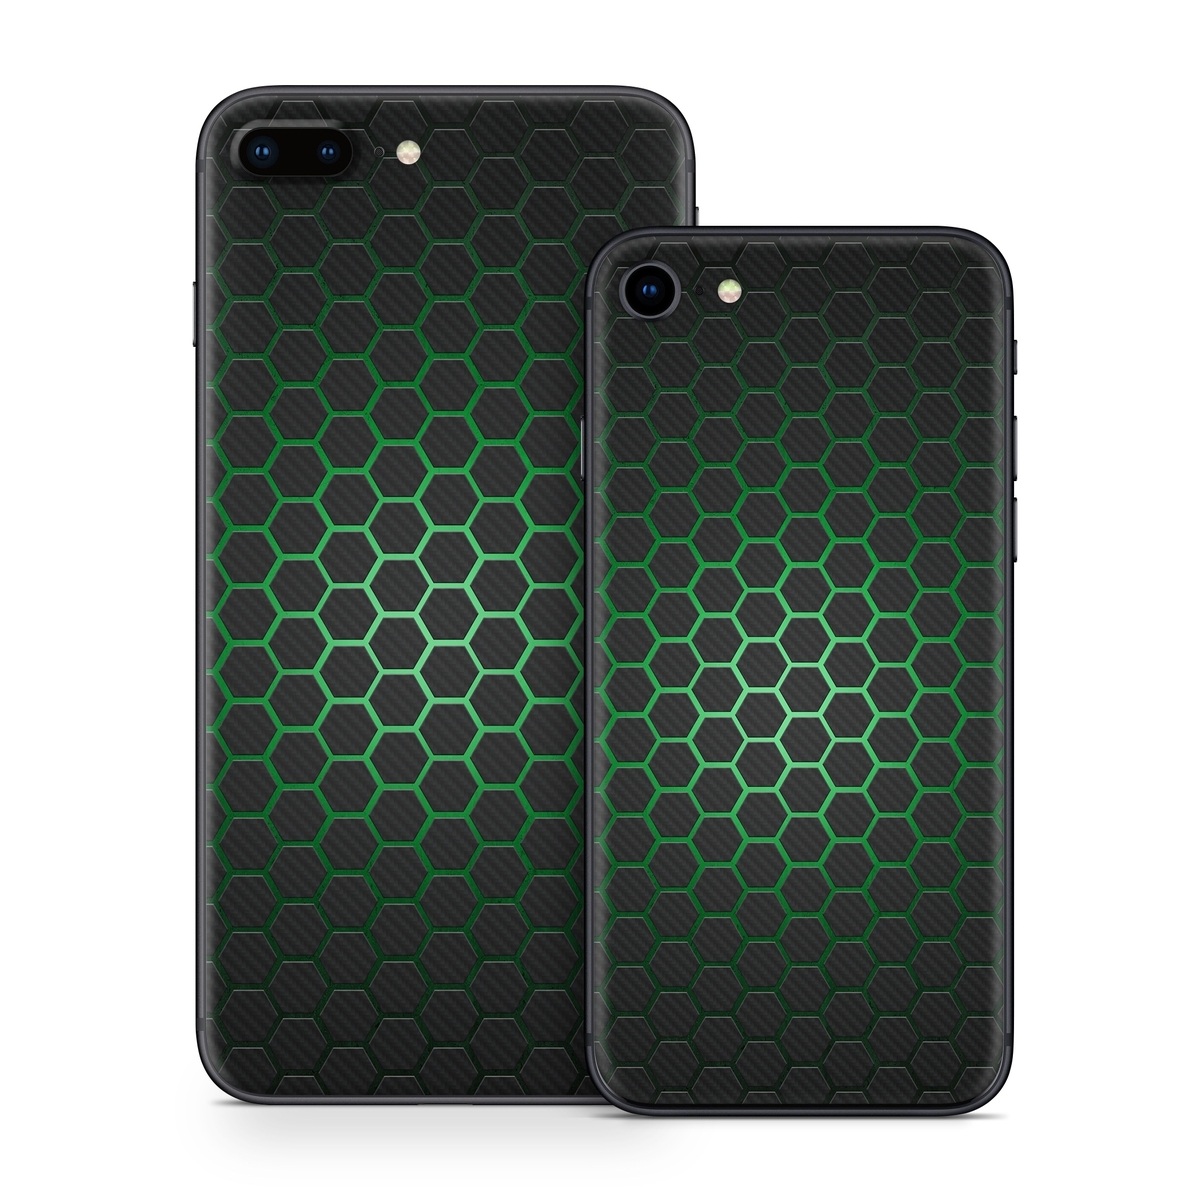  Skin design of Pattern, Metal, Design, Carbon, Space, Circle, with black, gray, green colors